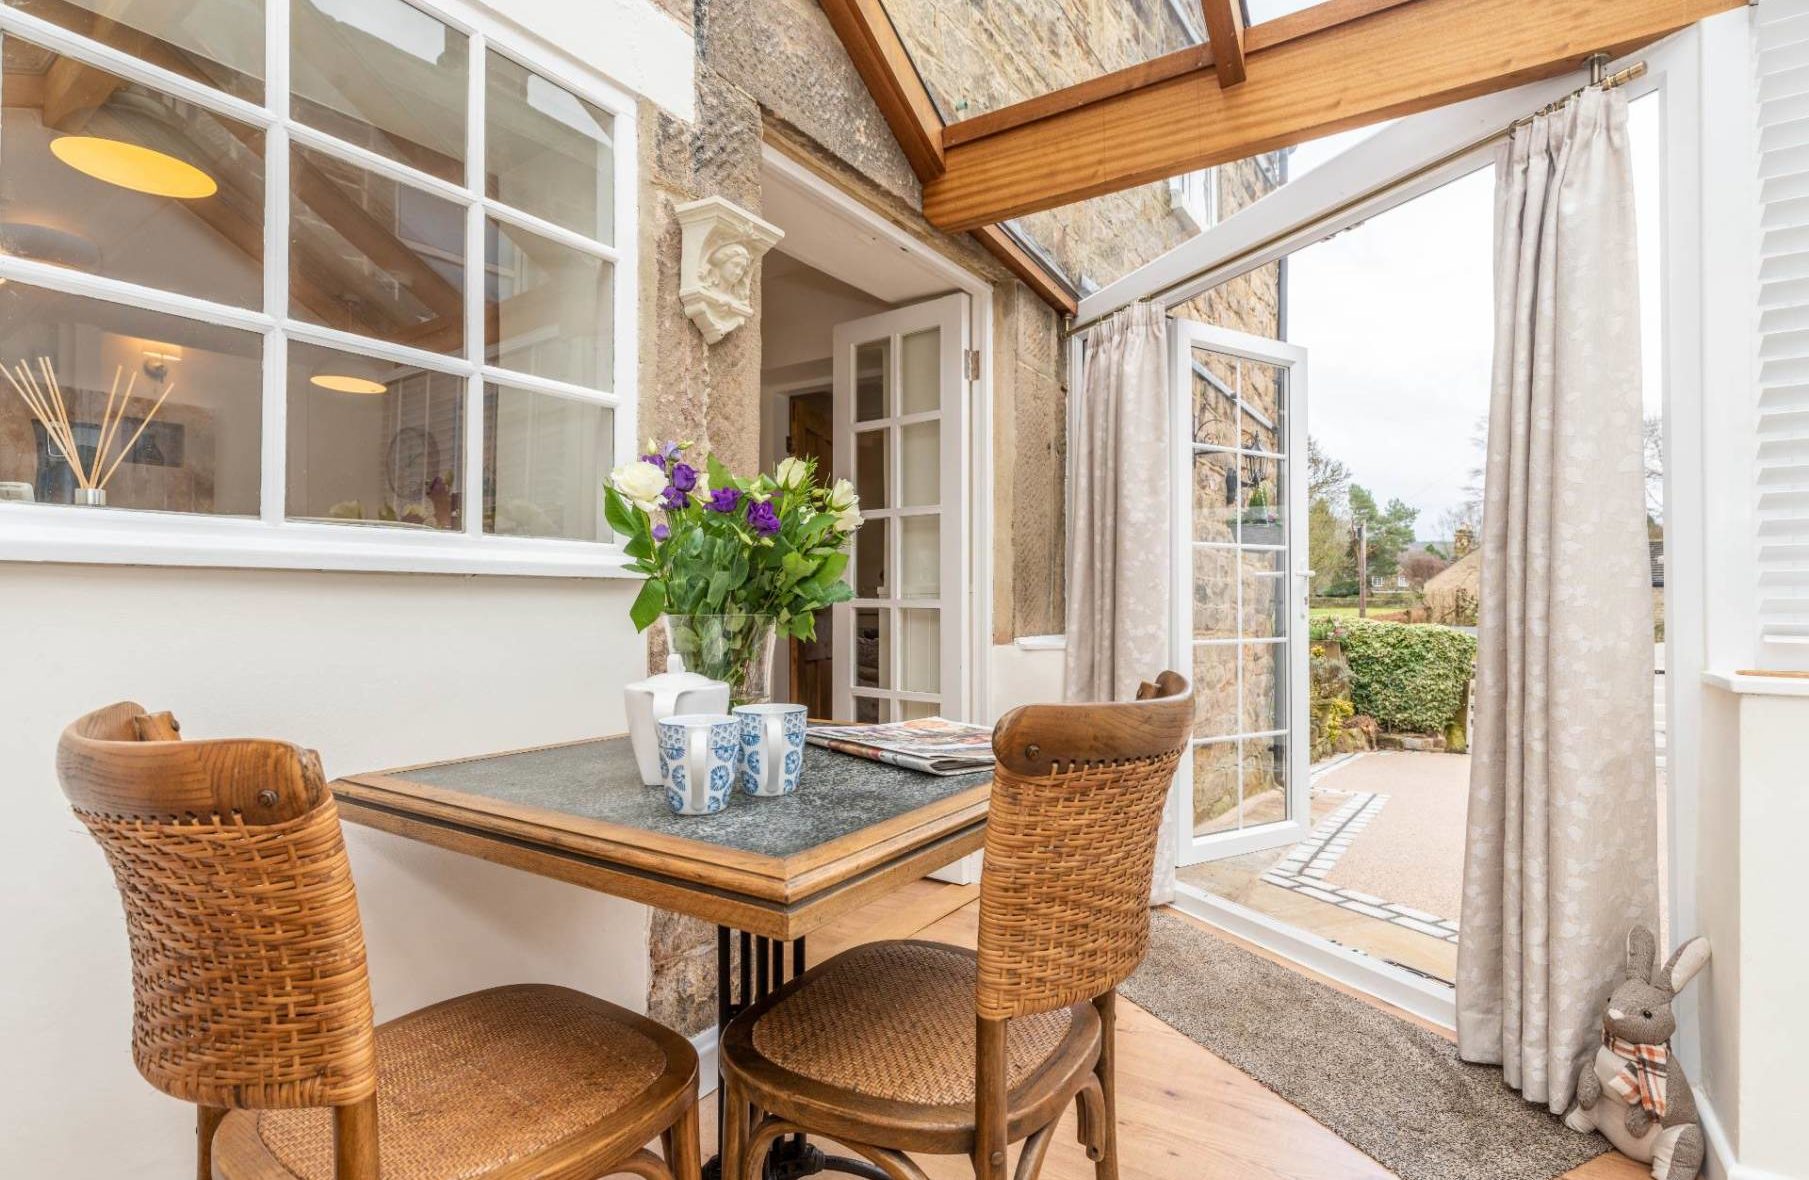 Conservatory | Baslow Holiday Cottages - Near Chatsworth House | Peak District